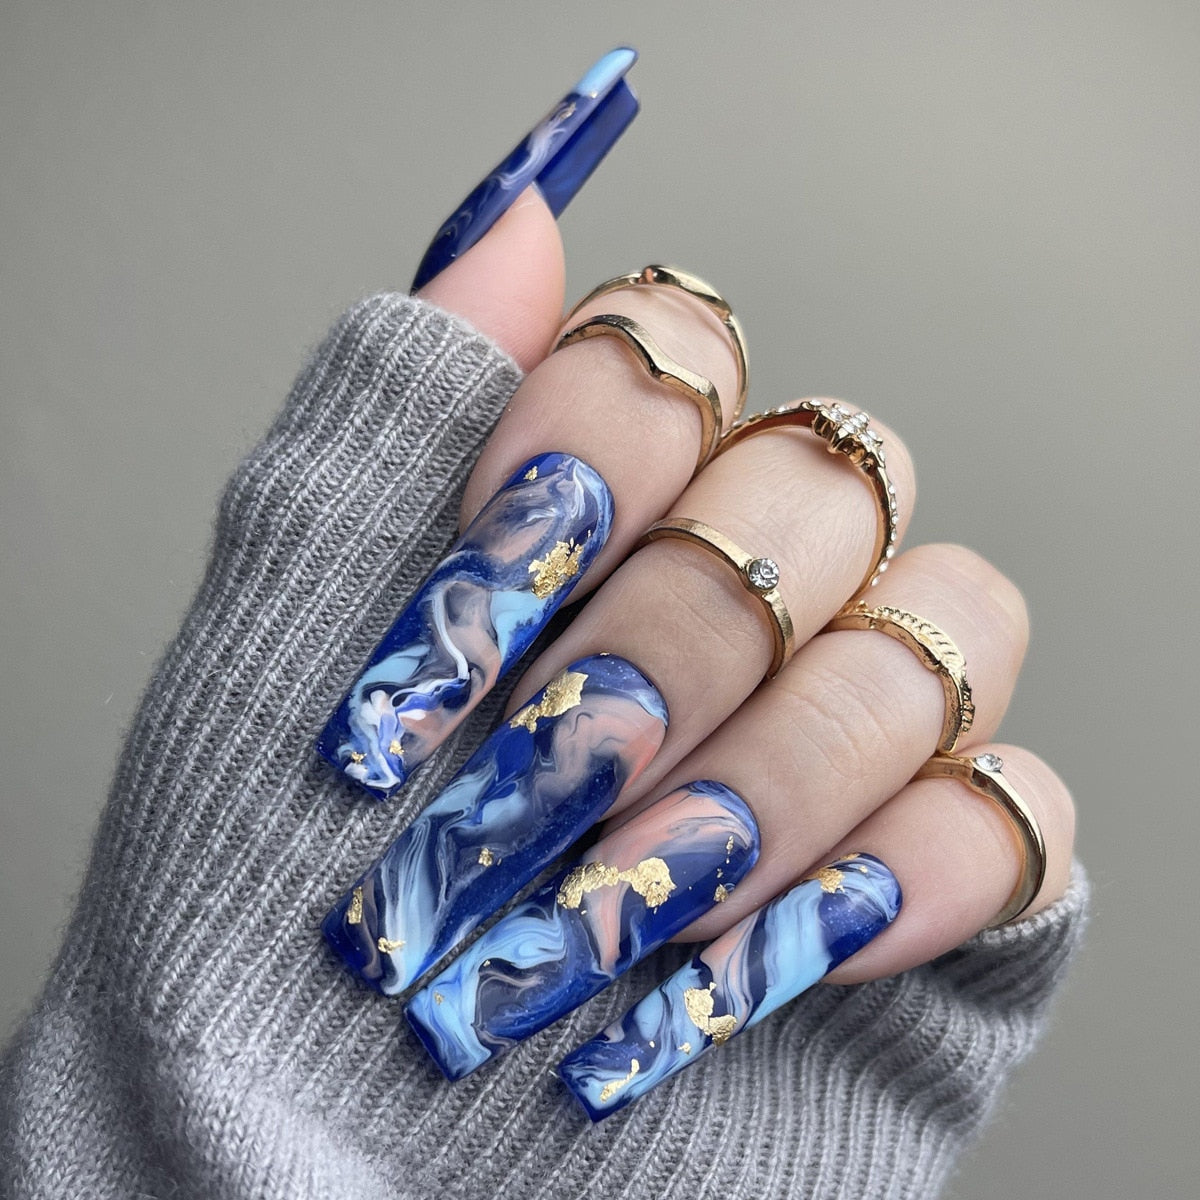 3D ballet fake nails accessories long french coffin tips Dream Blue Ink Printing with gold foils faux ongles press on false nail AMAIO